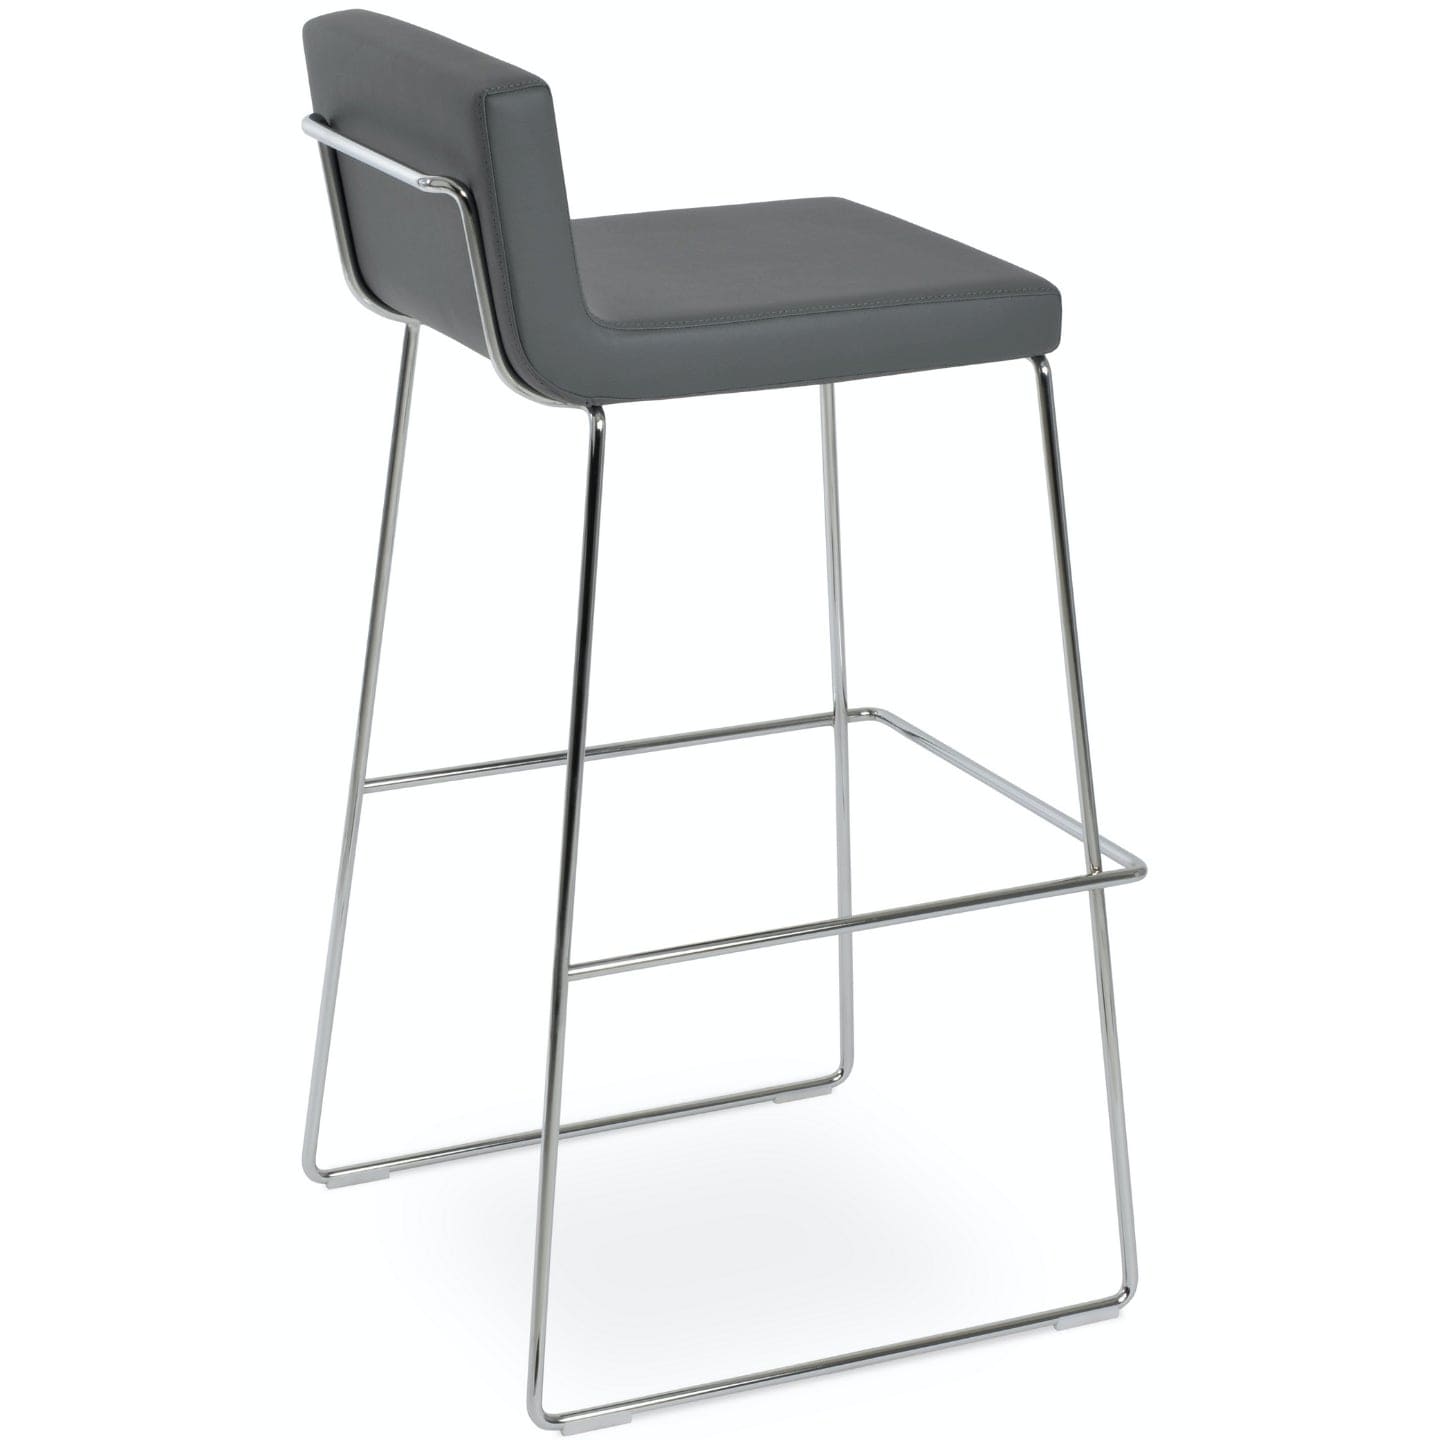 Soho Concept dallas-wire-handle-back-metal-wire-base-leatherette-seat-kitchen-stool-in-grey